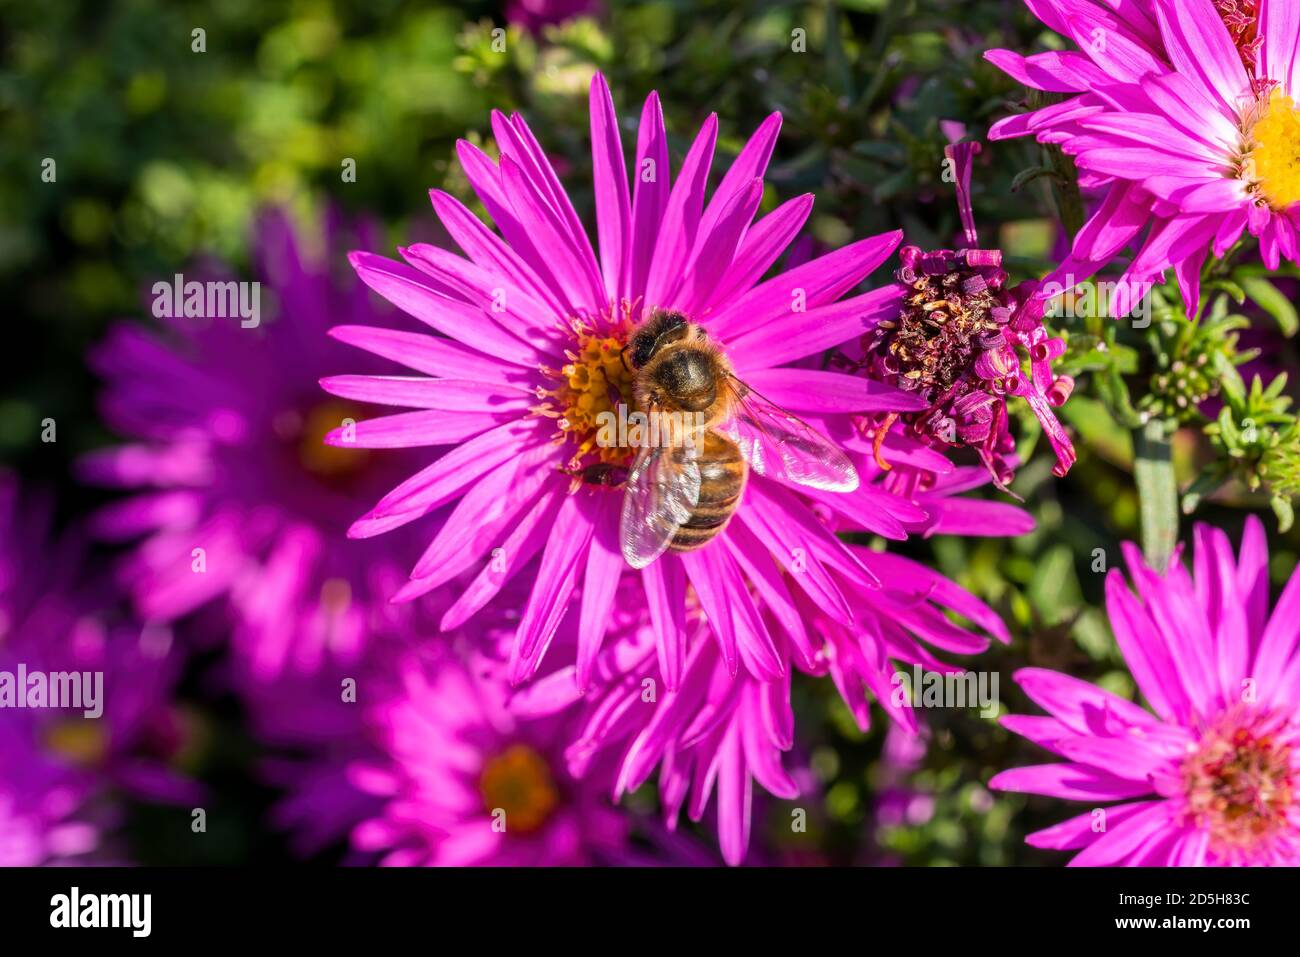 Aster novi belgii 'Dandy' a magenta pink herbaceous summer autumn perennial flower plant commonly known as Michaelmas daisy with a honey bee stock pho Stock Photo